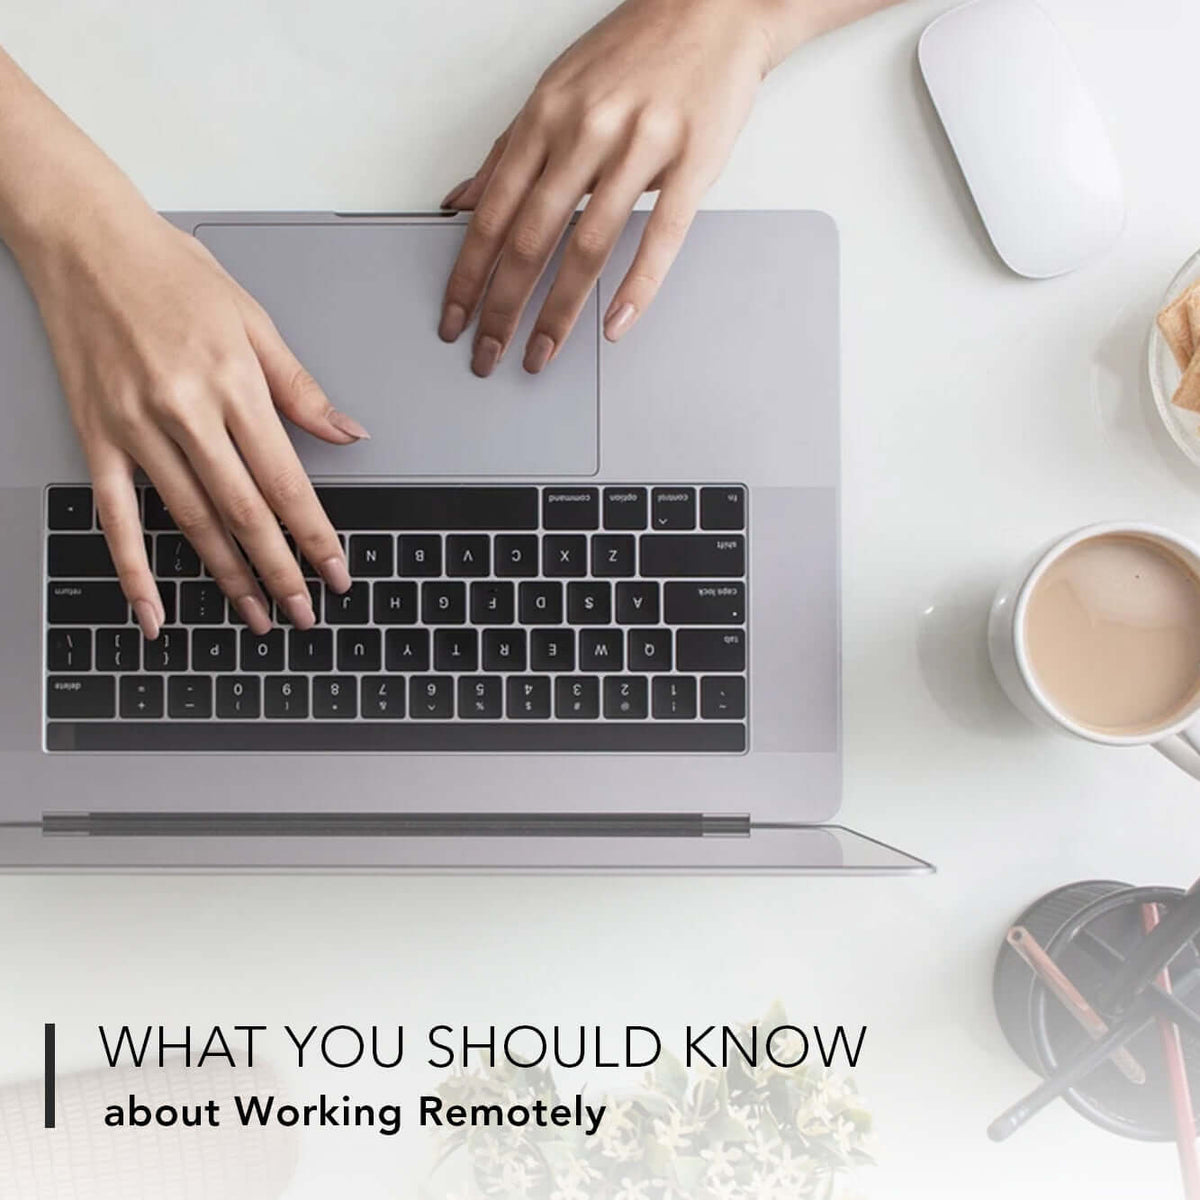 What You Should Know about Working Remotely